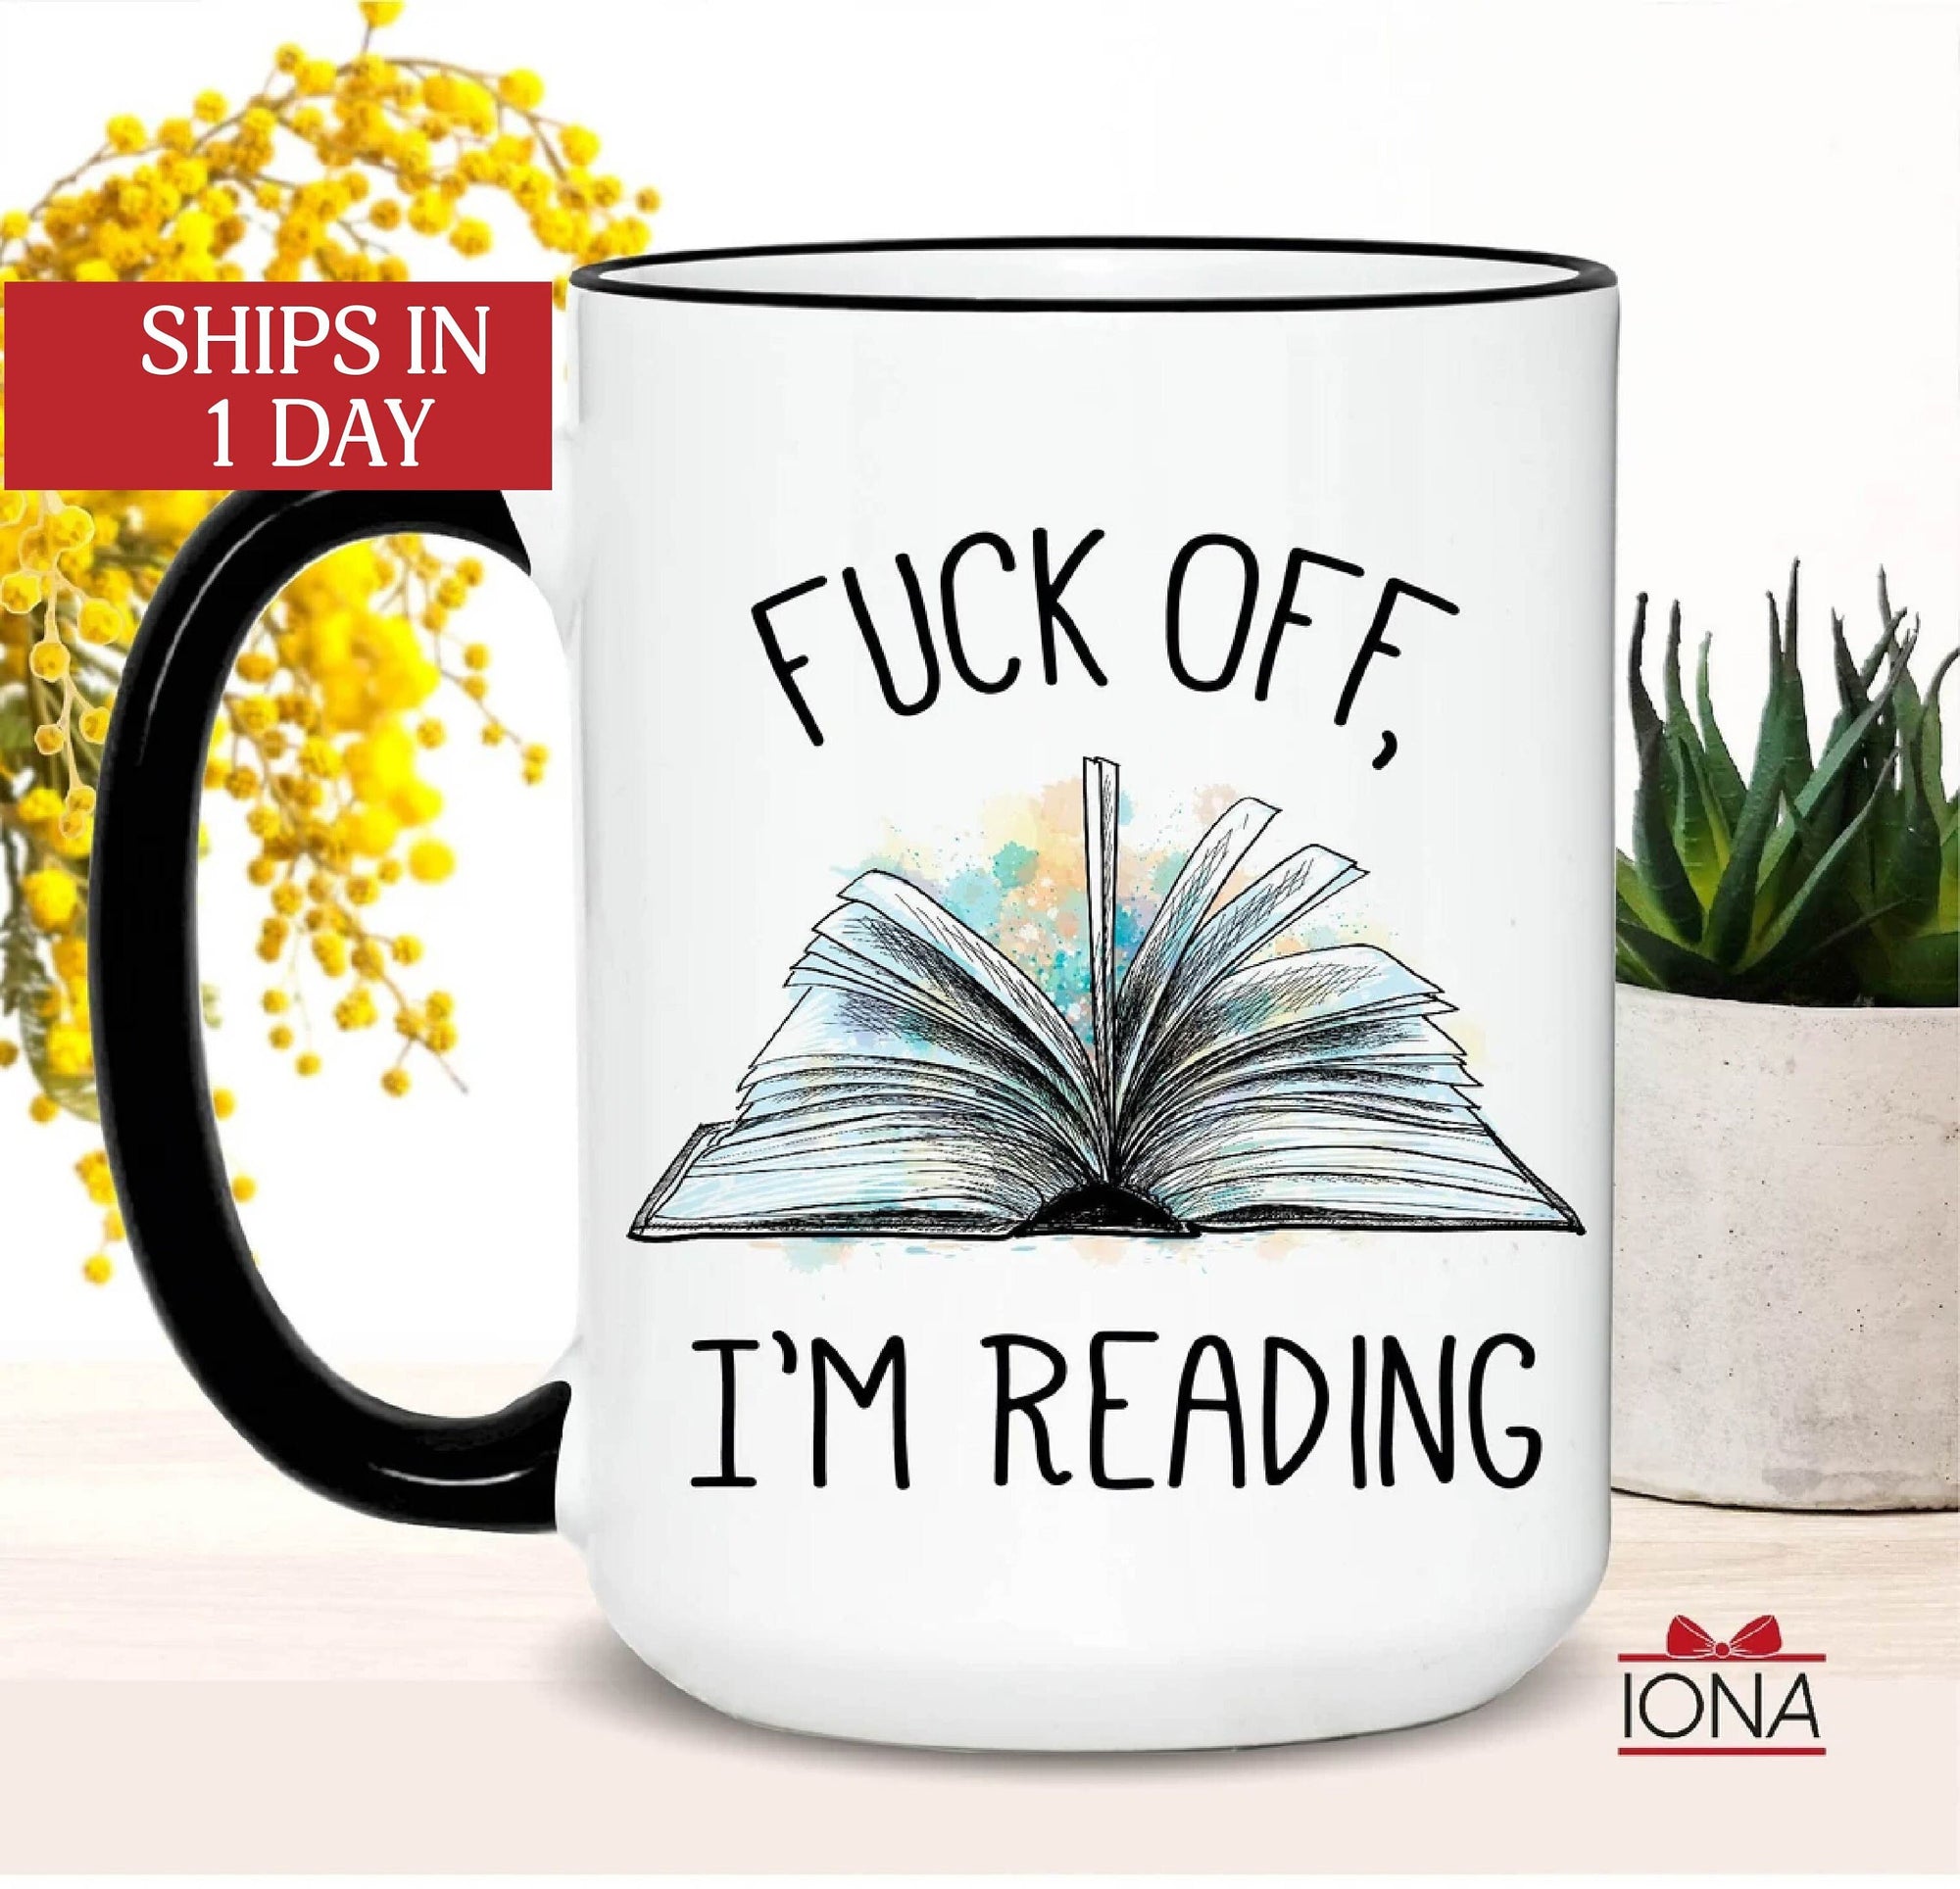 Reading Mug, Gift For Readers, Bookworm Gift, Book Club Gift, Gift For Book Lovers, Gift for Women, Book Lovers Coffee Cup, Funny Book Mug